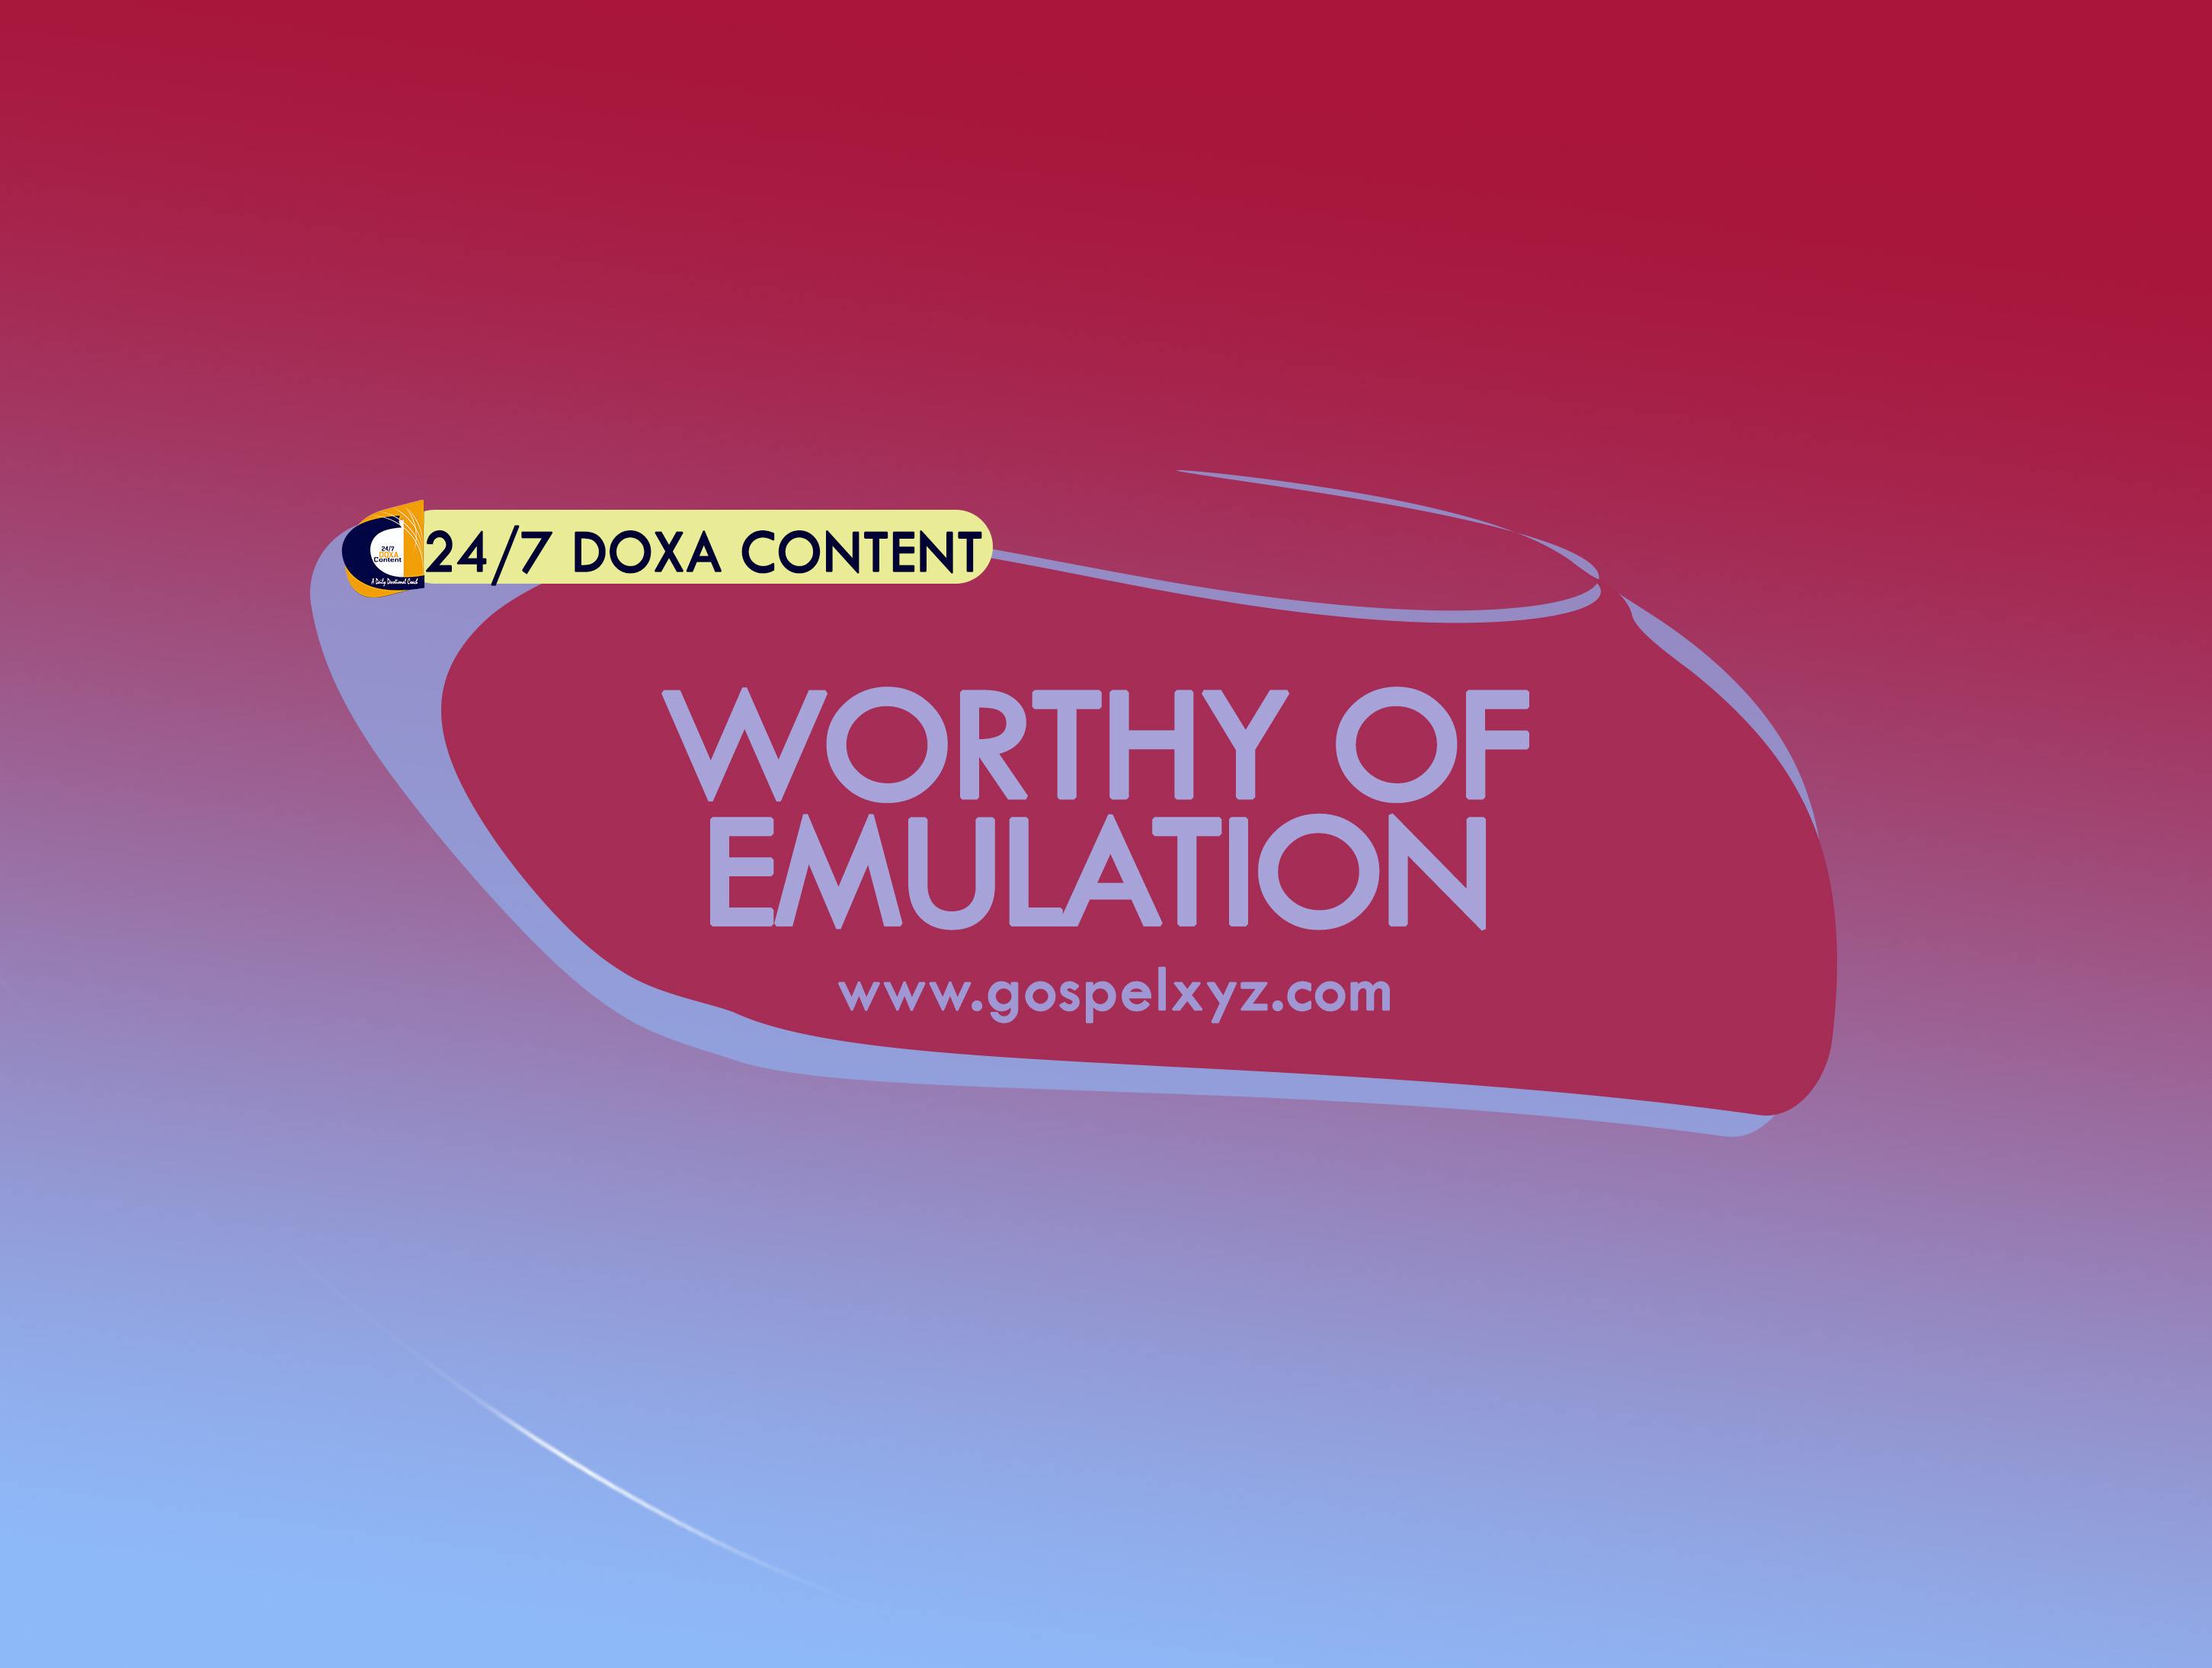 24/7 DOXA Content 2019 WEDNESDAY, 19th June- WORTHY OF EMULATION